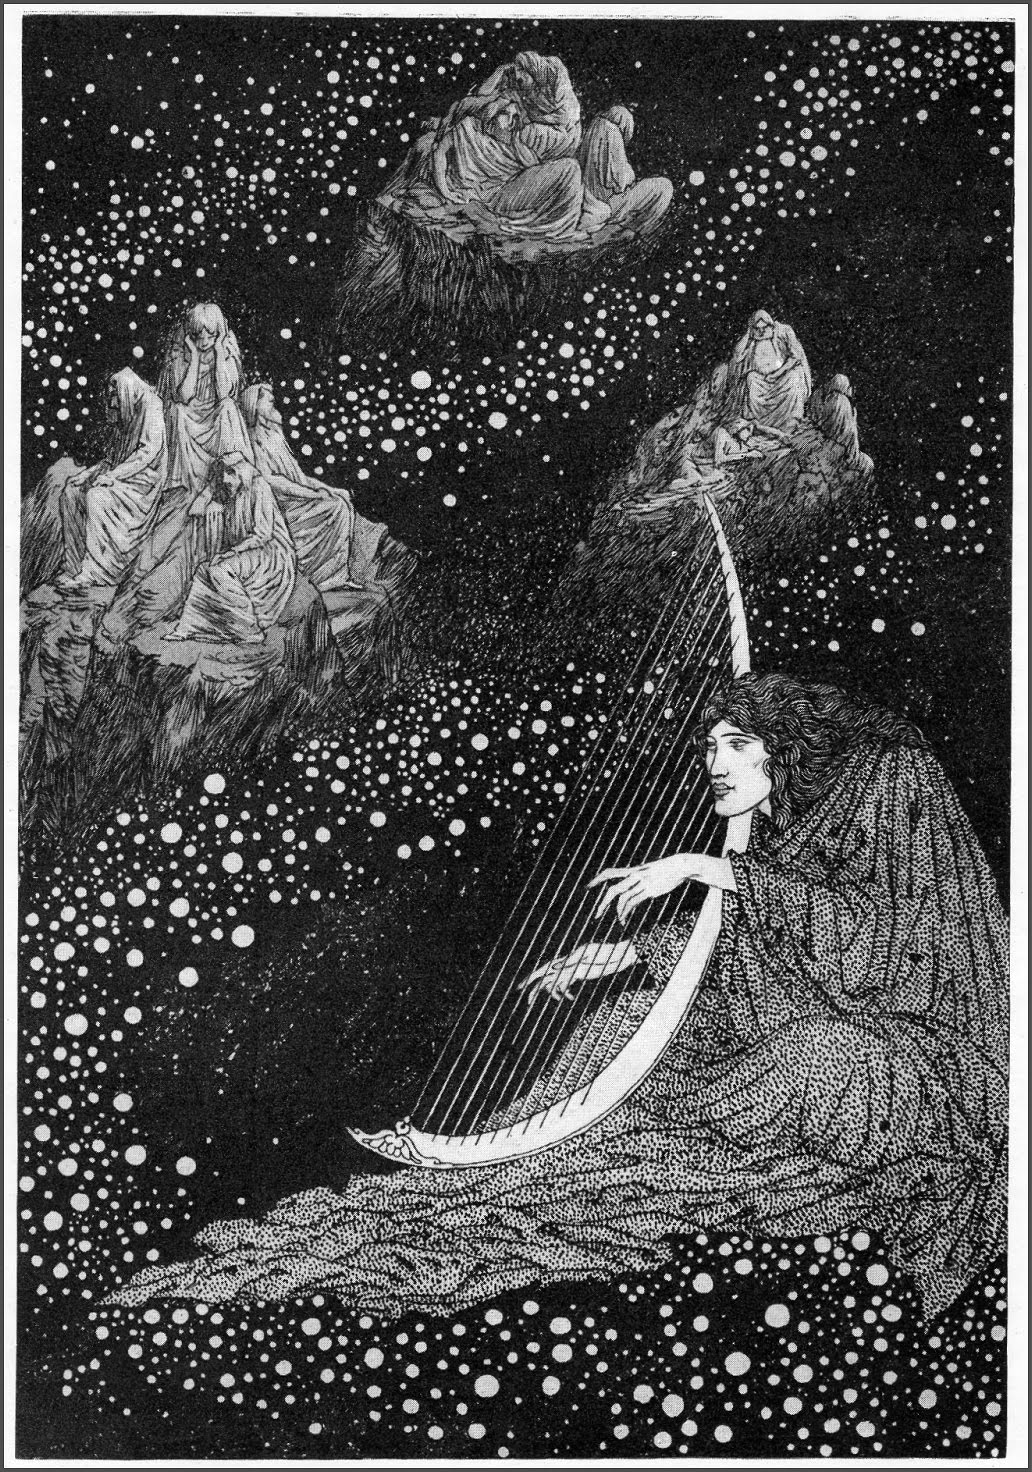 black & white illustration by sindey sime of a man in a starfield playing a harp